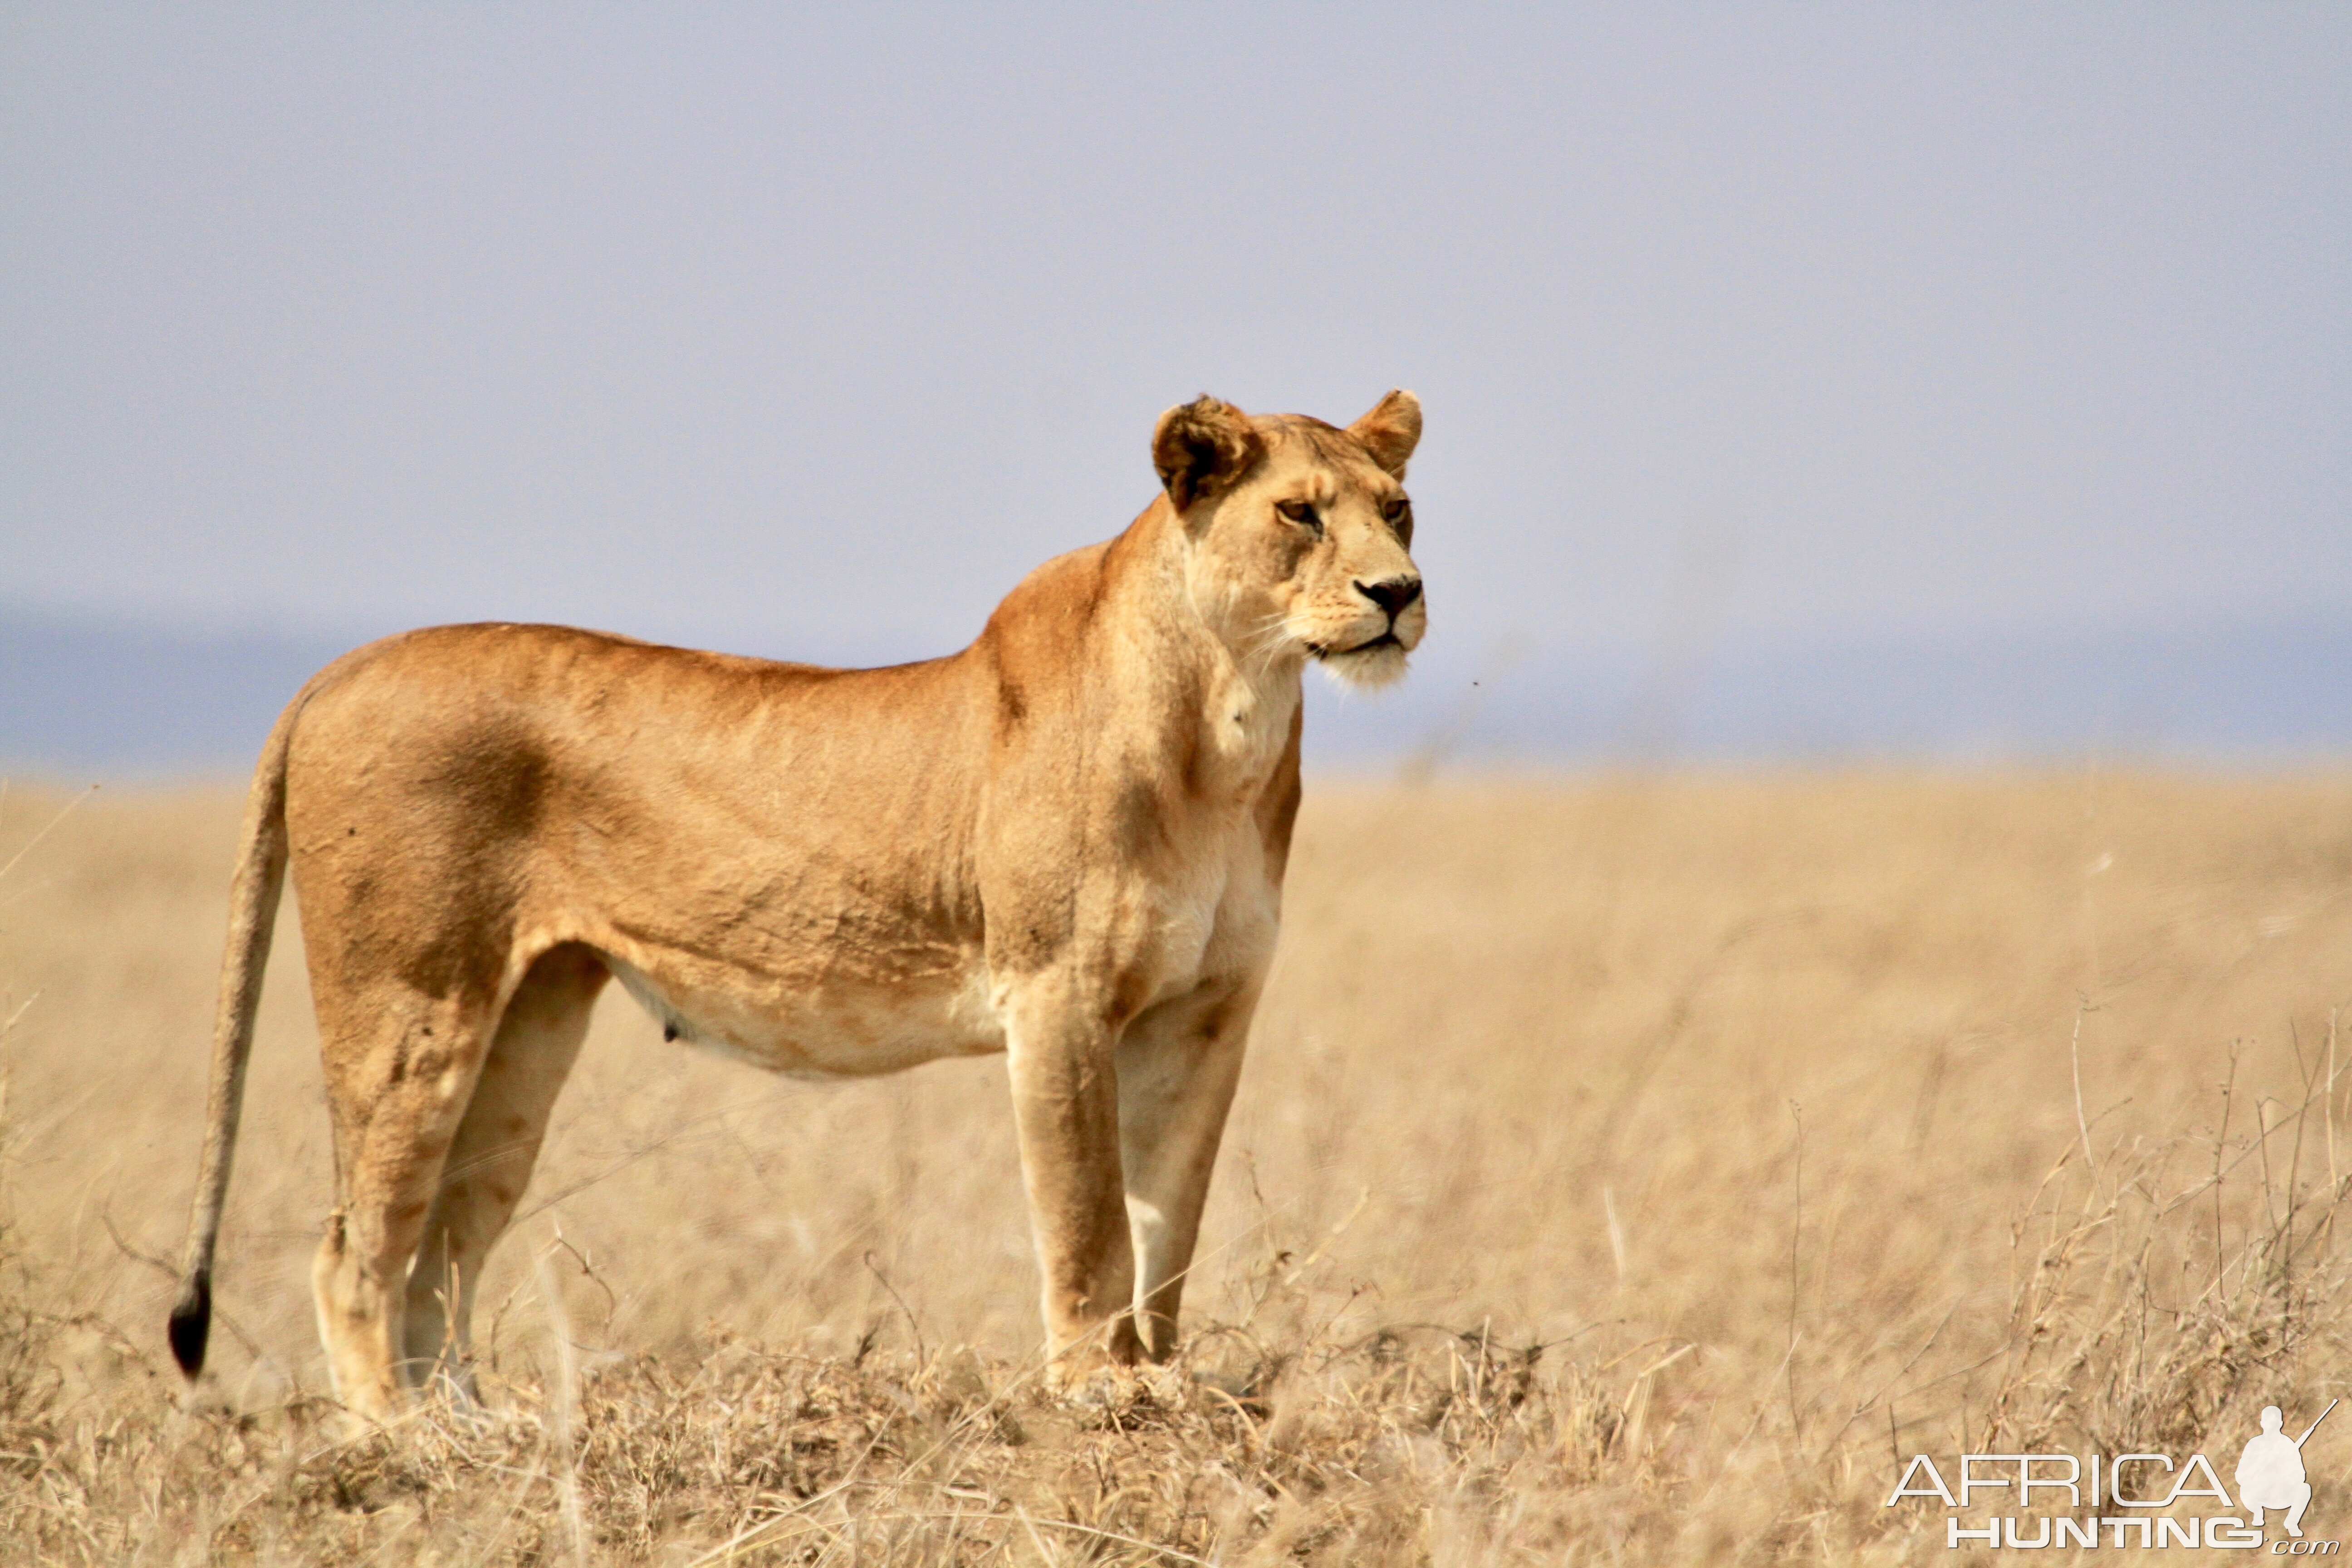 Lioness in the Serengeti National Park Tanzania